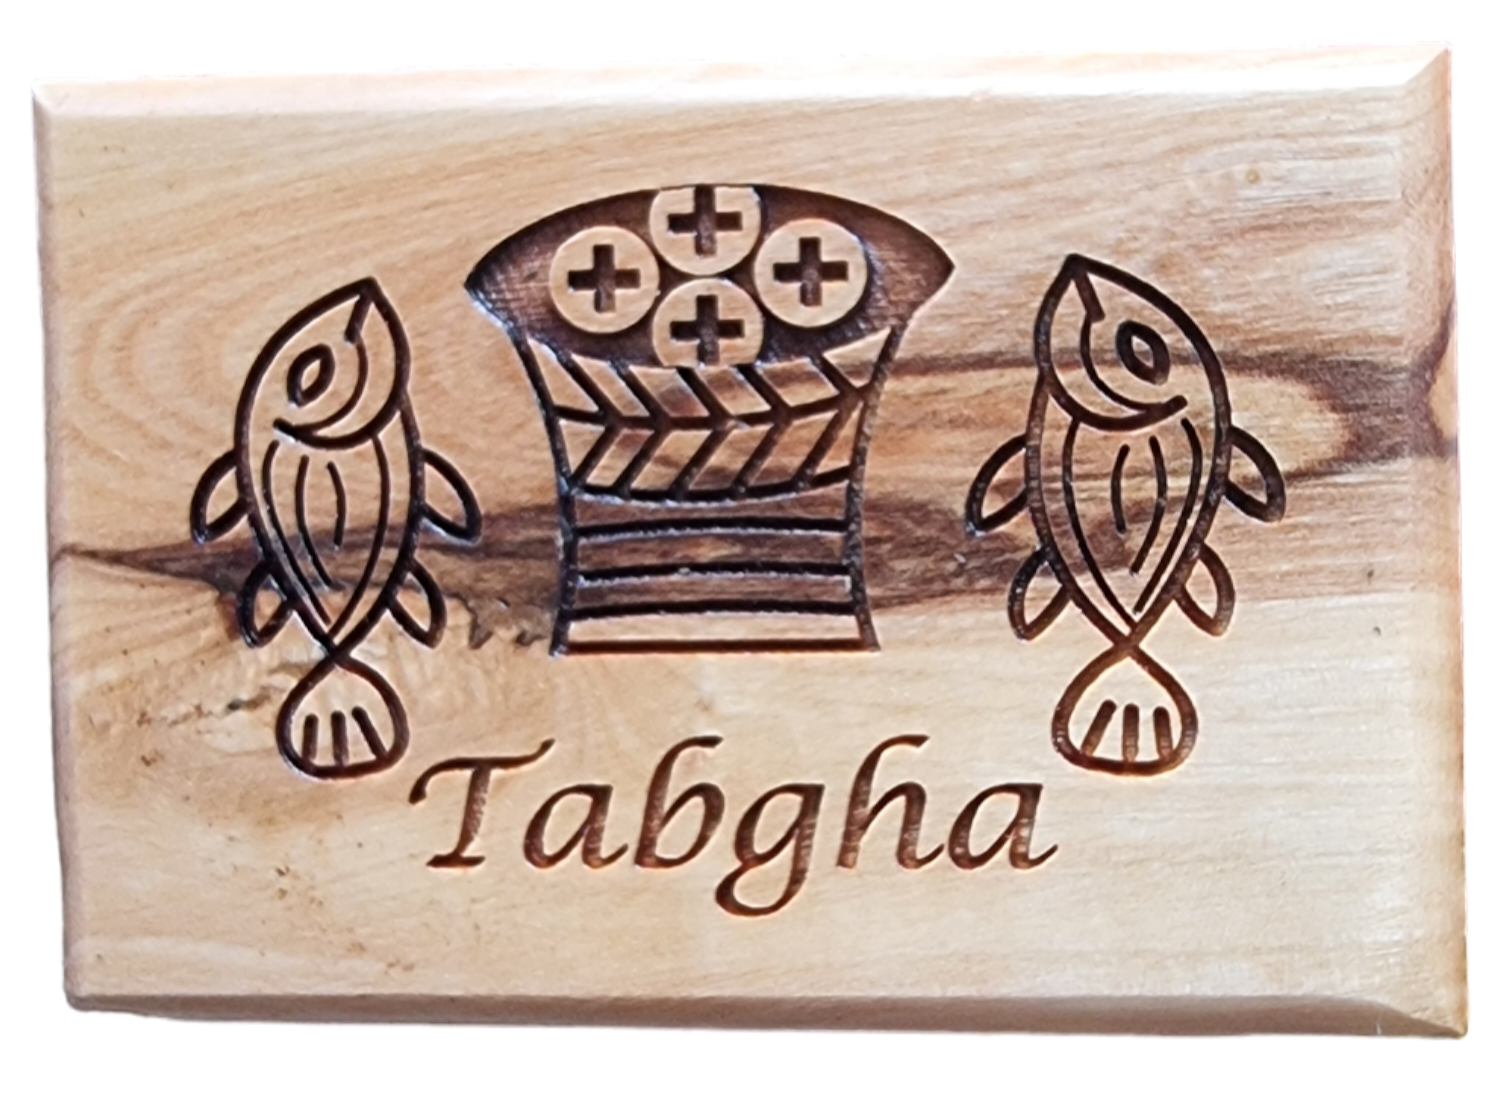 Click to Discover: Why is This Biblical Site Called Tabgha?